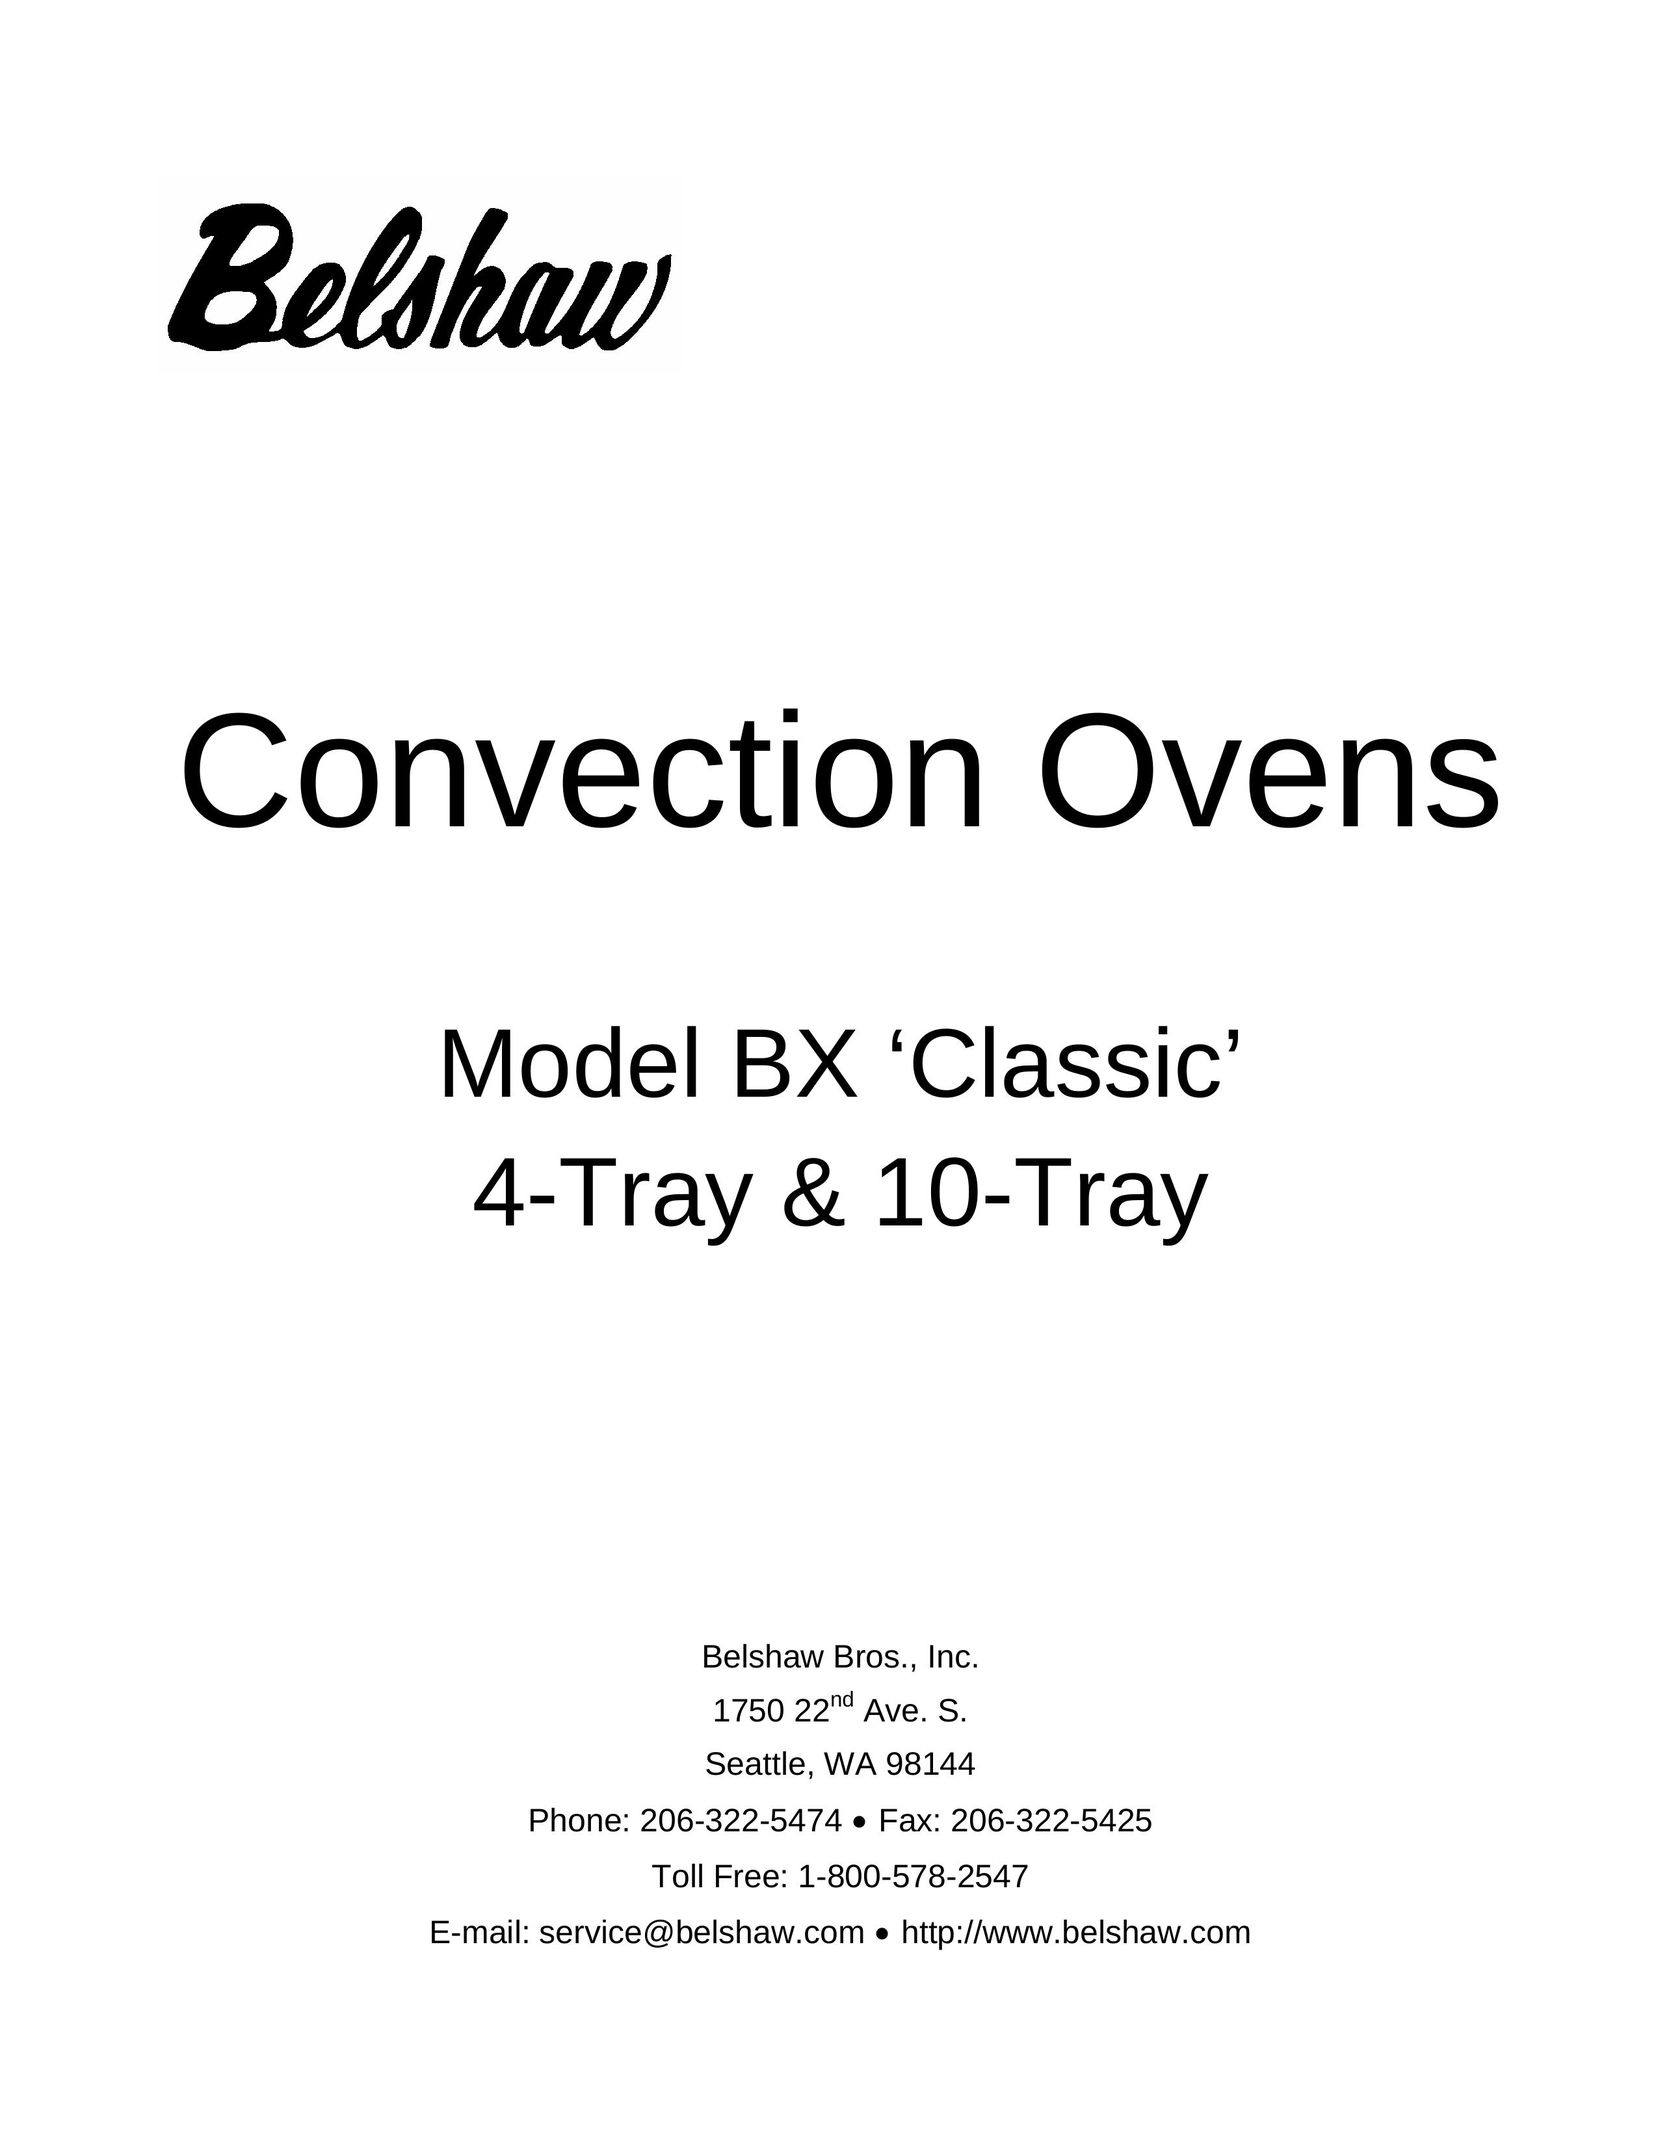 Belshaw Brothers 4-Tray Convection Oven User Manual